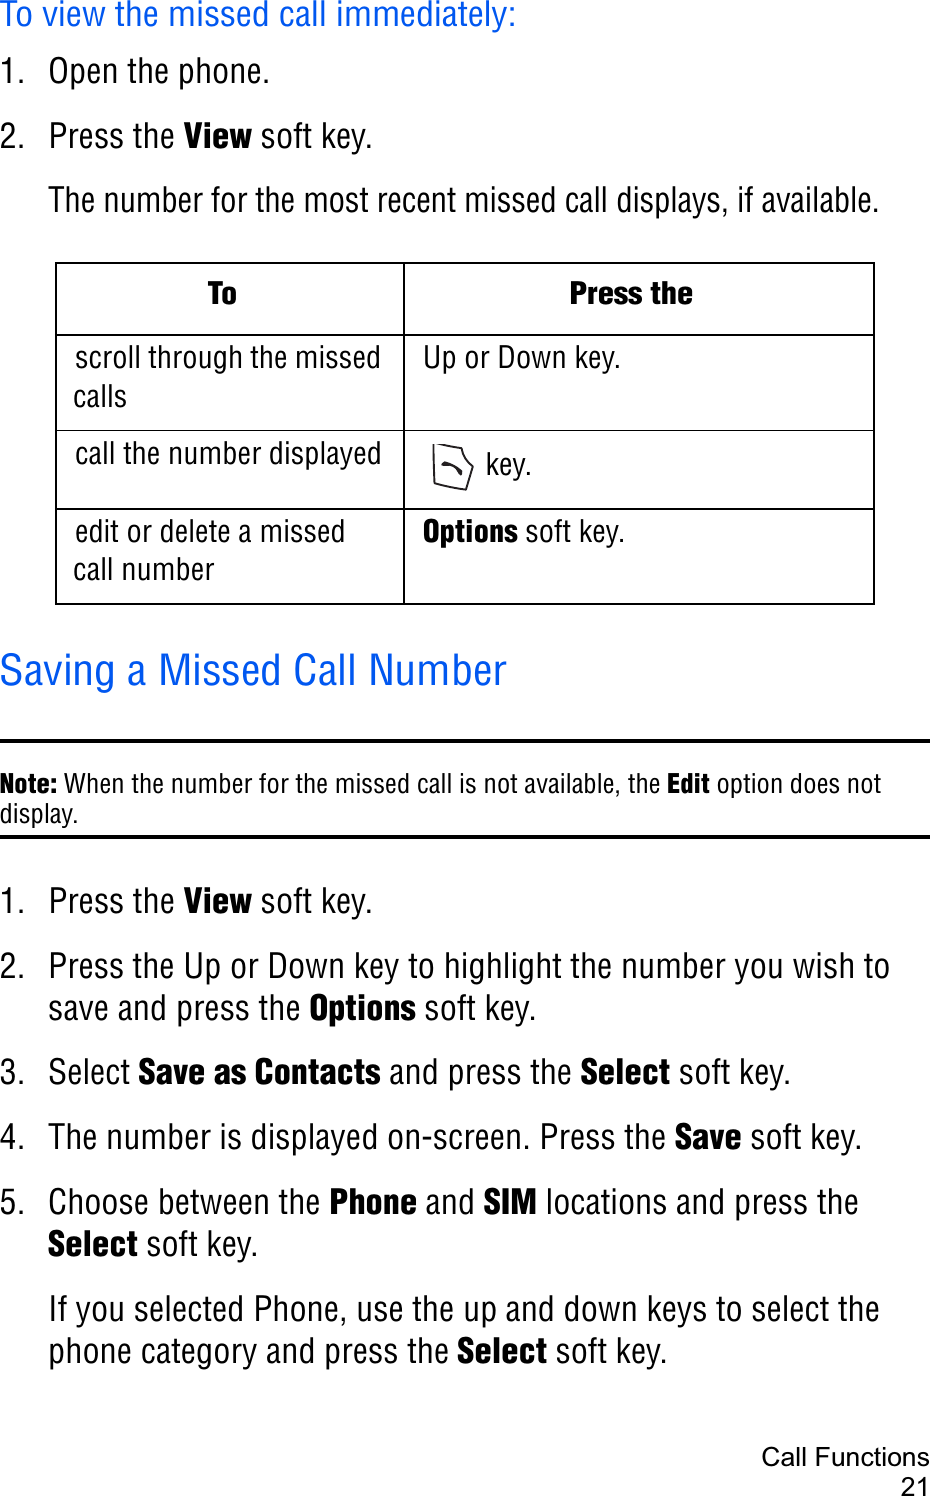 Call Functions21To view the missed call immediately:1. Open the phone.2. Press the View soft key.The number for the most recent missed call displays, if available.Saving a Missed Call NumberNote: When the number for the missed call is not available, the Edit option does not display.1. Press the View soft key.2. Press the Up or Down key to highlight the number you wish to save and press the Options soft key.3. Select Save as Contacts and press the Select soft key.4. The number is displayed on-screen. Press the Save soft key.5. Choose between the Phone and SIM locations and press the Select soft key.If you selected Phone, use the up and down keys to select the phone category and press the Select soft key.To Press thescroll through the missed callsUp or Down key.call the number displayed  key.edit or delete a missed call numberOptions soft key.